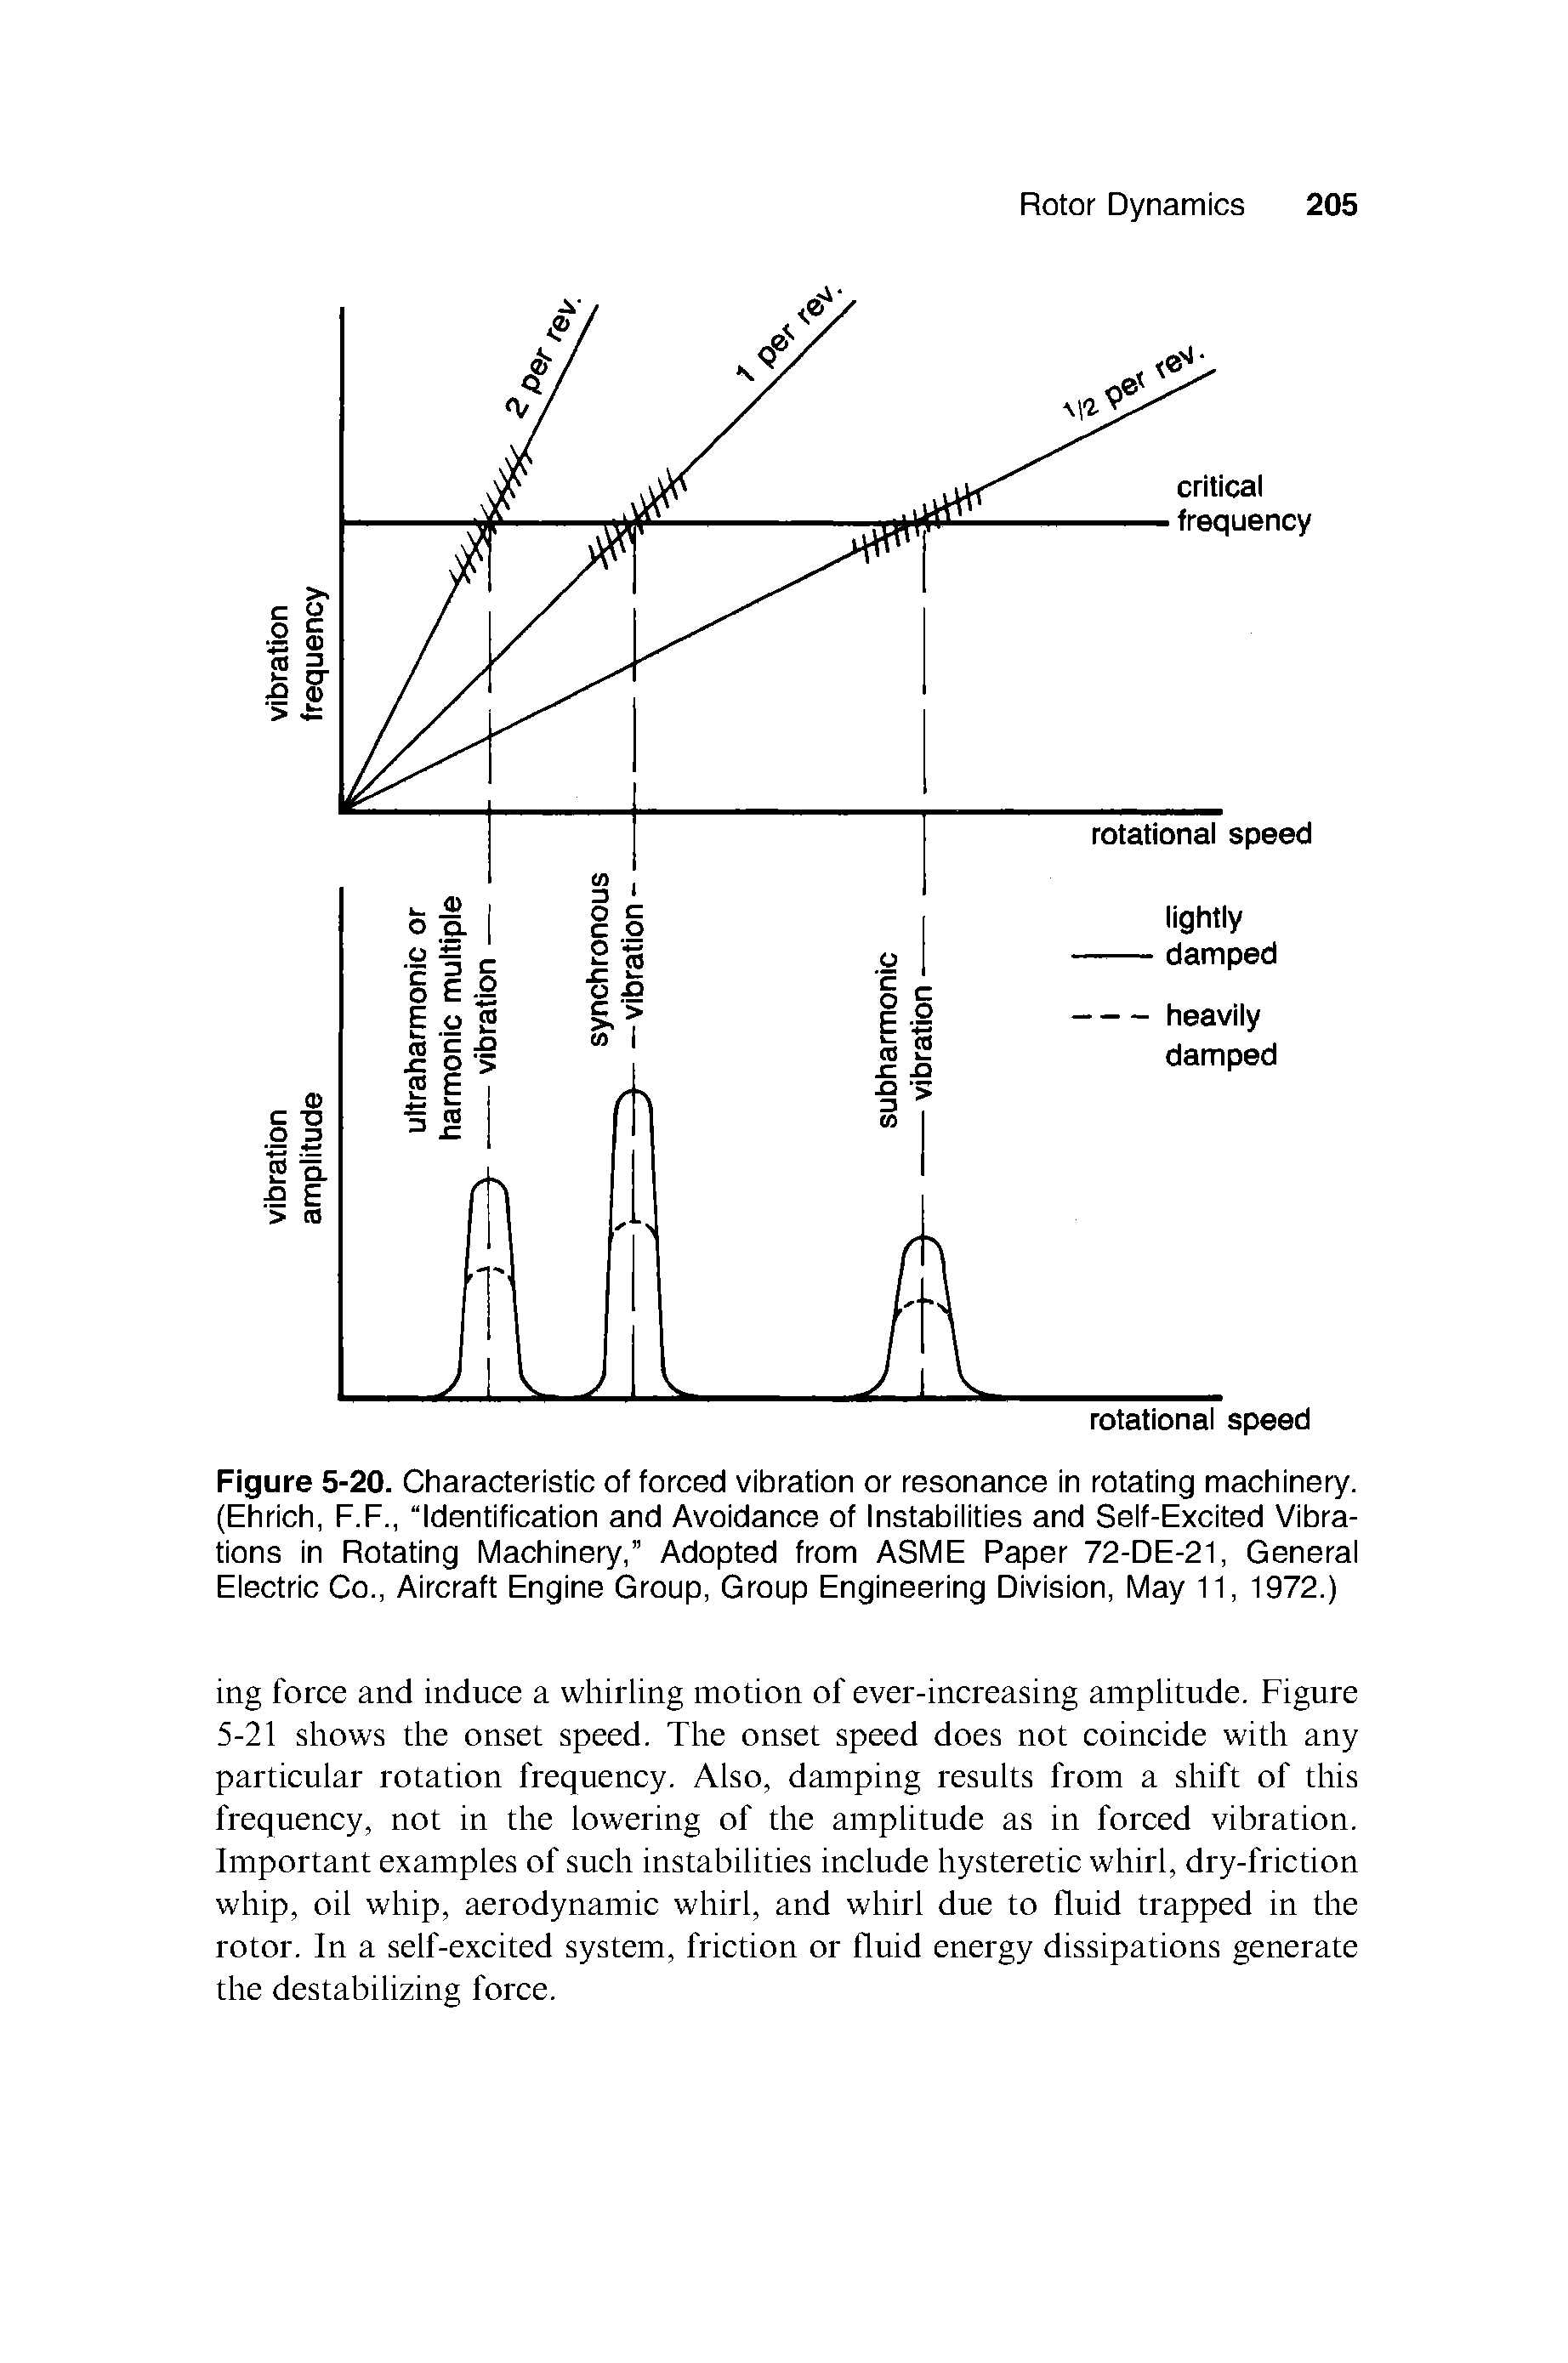 Figure 5-20. Characteristic of forced vibration or resonance in rotating machinery. (Ehrich, F.F., Identification and Avoidance of Instabiiities and Seif-Excited Vibrations in Rotating Machinery, Adopted from ASME Paper 72-DE-21, Generai Eiectric Co., Aircraft Engine Group, Group Engineering Division, May 11, 1972.)...